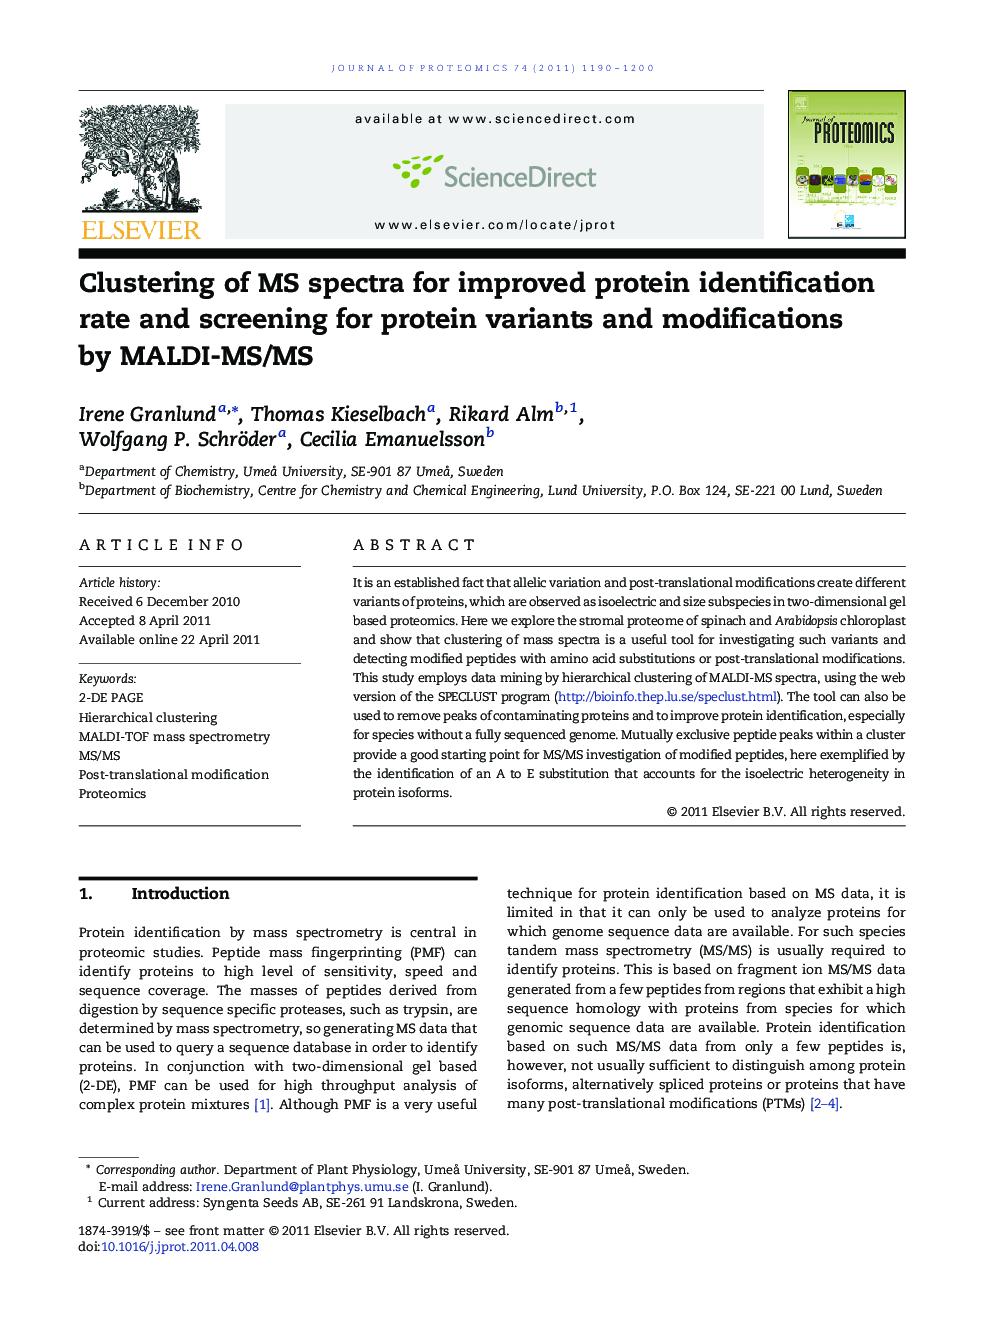 Clustering of MS spectra for improved protein identification rate and screening for protein variants and modifications by MALDI-MS/MS